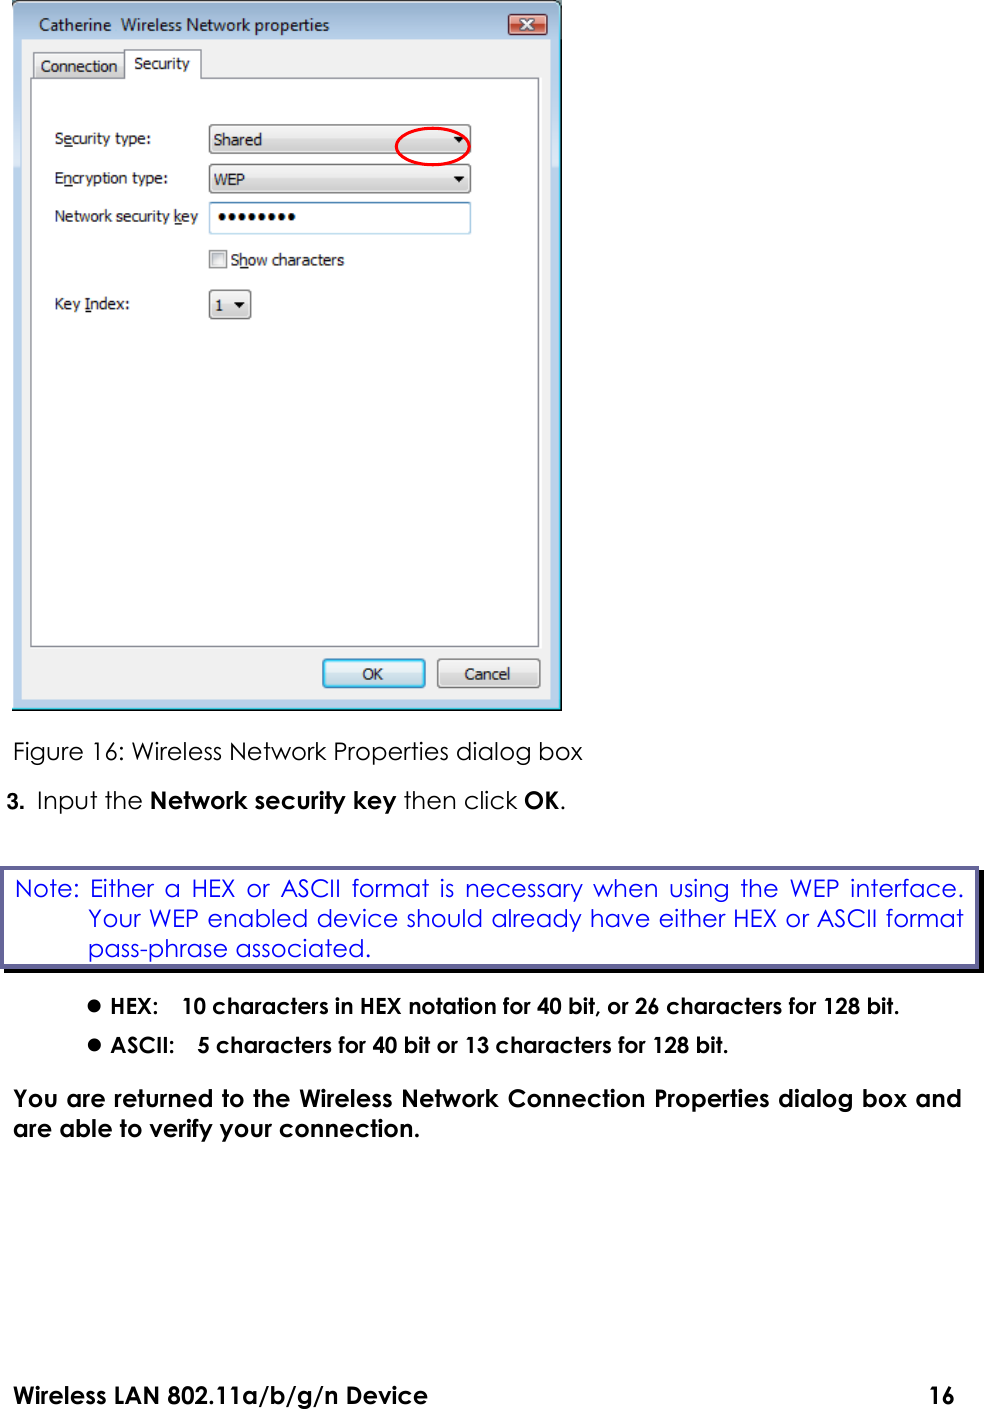 Wireless LAN 802.11a/b/g/n Device                                                                                  16  Figure 16: Wireless Network Properties dialog box 3. Input the Network security key then click OK.  HEX:    10 characters in HEX notation for 40 bit, or 26 characters for 128 bit.  ASCII:    5 characters for 40 bit or 13 characters for 128 bit. You are returned to the Wireless Network Connection Properties dialog box and are able to verify your connection.      Note:  Either a  HEX  or  ASCII  format is  necessary  when using  the  WEP  interface. Your WEP enabled device should already have either HEX or ASCII format pass-phrase associated.   